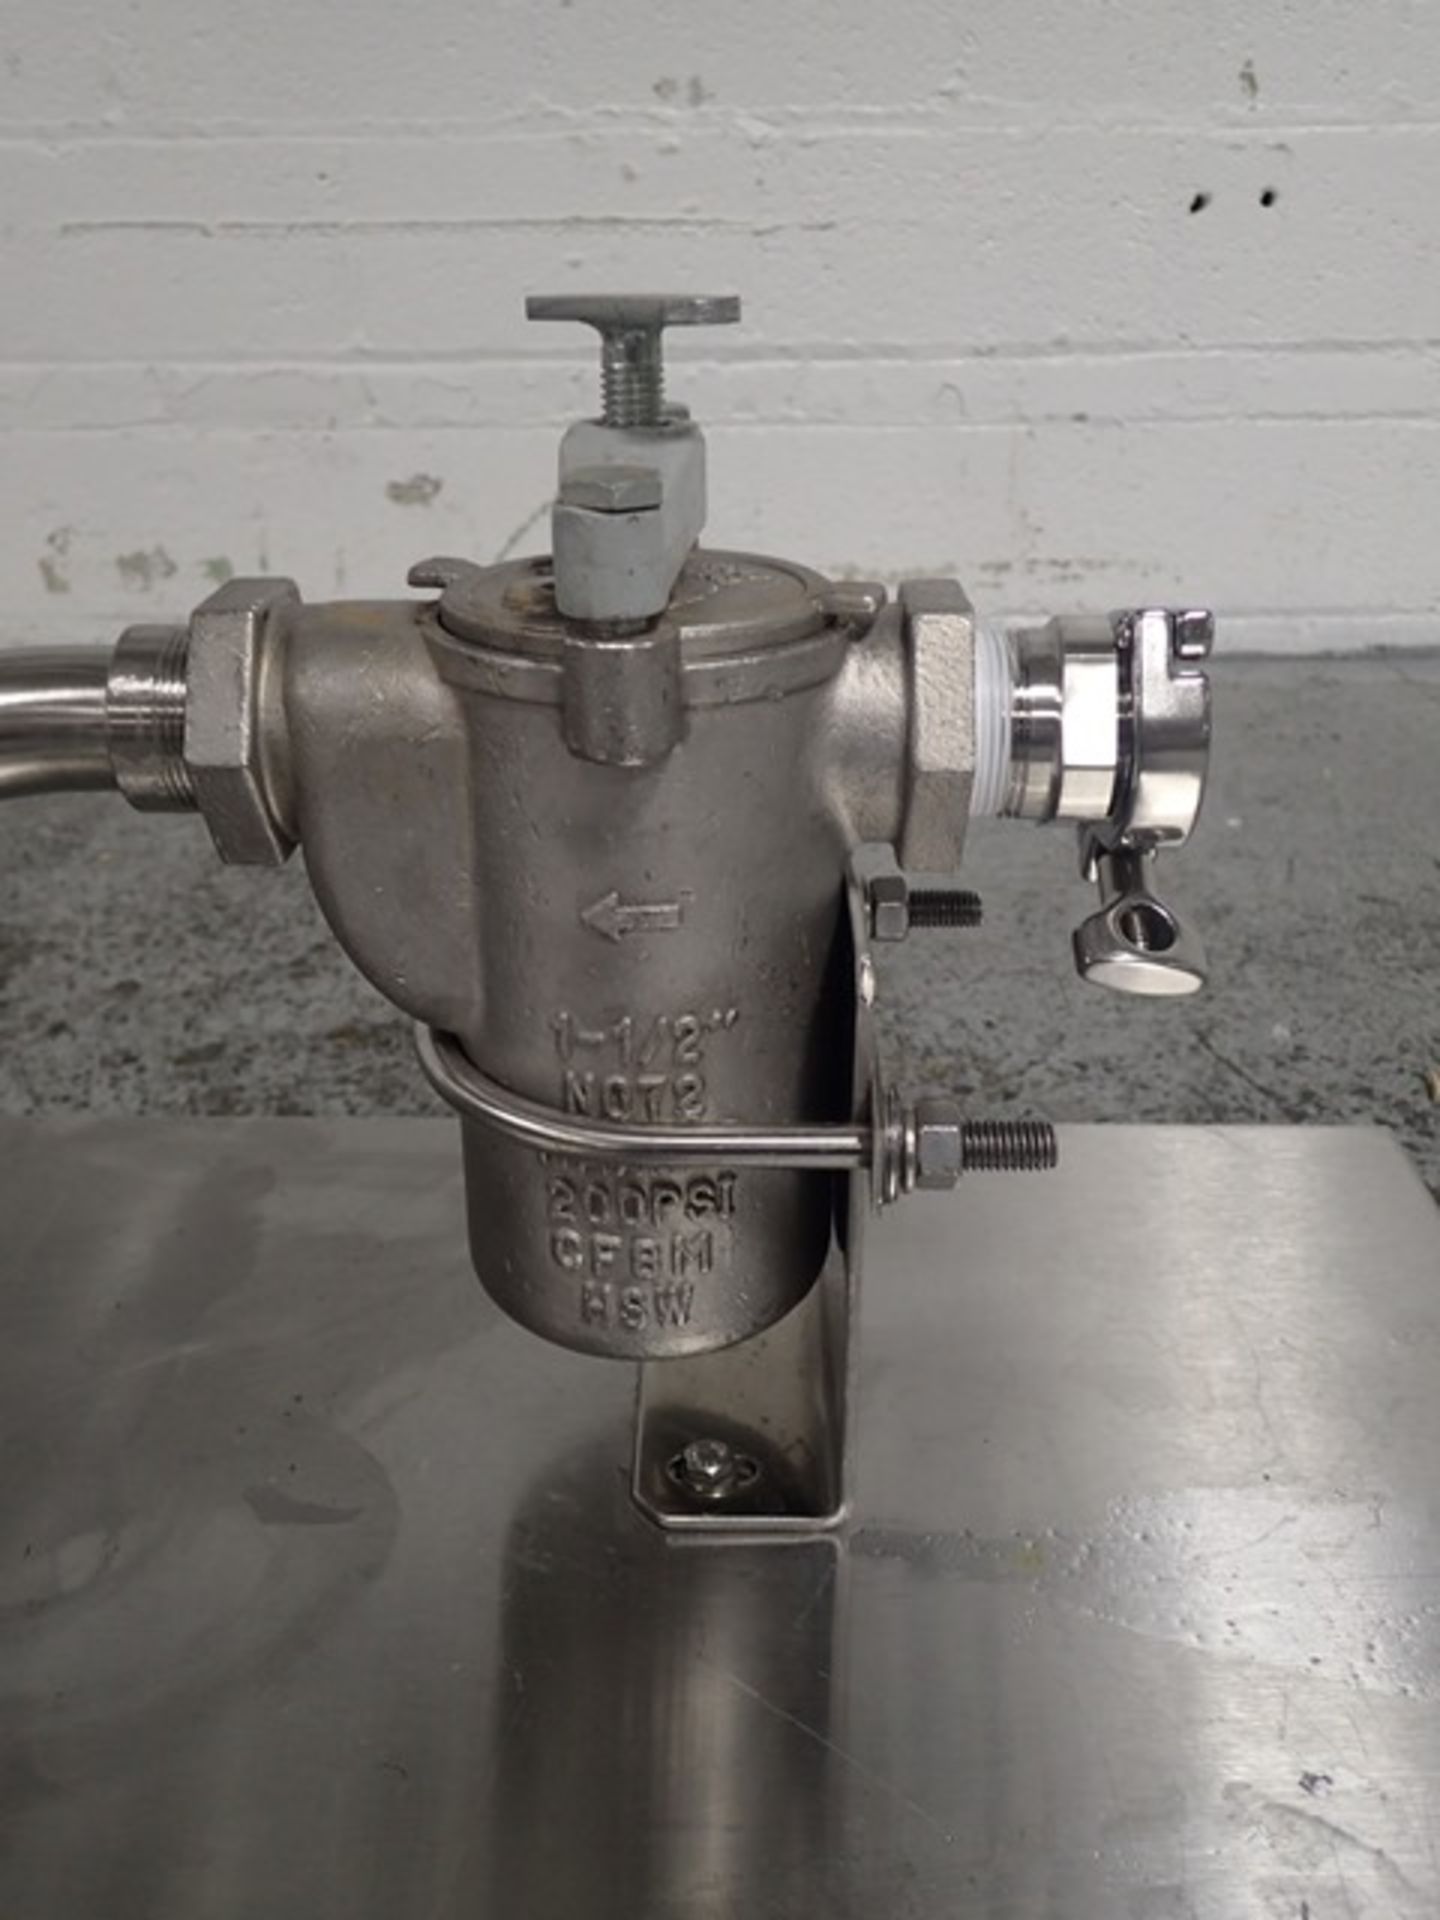 Waukesha centrifugal pump, model 2065LV00009, stainless steel construction, 1.5" x 1.5", 10 hp, - Image 7 of 8